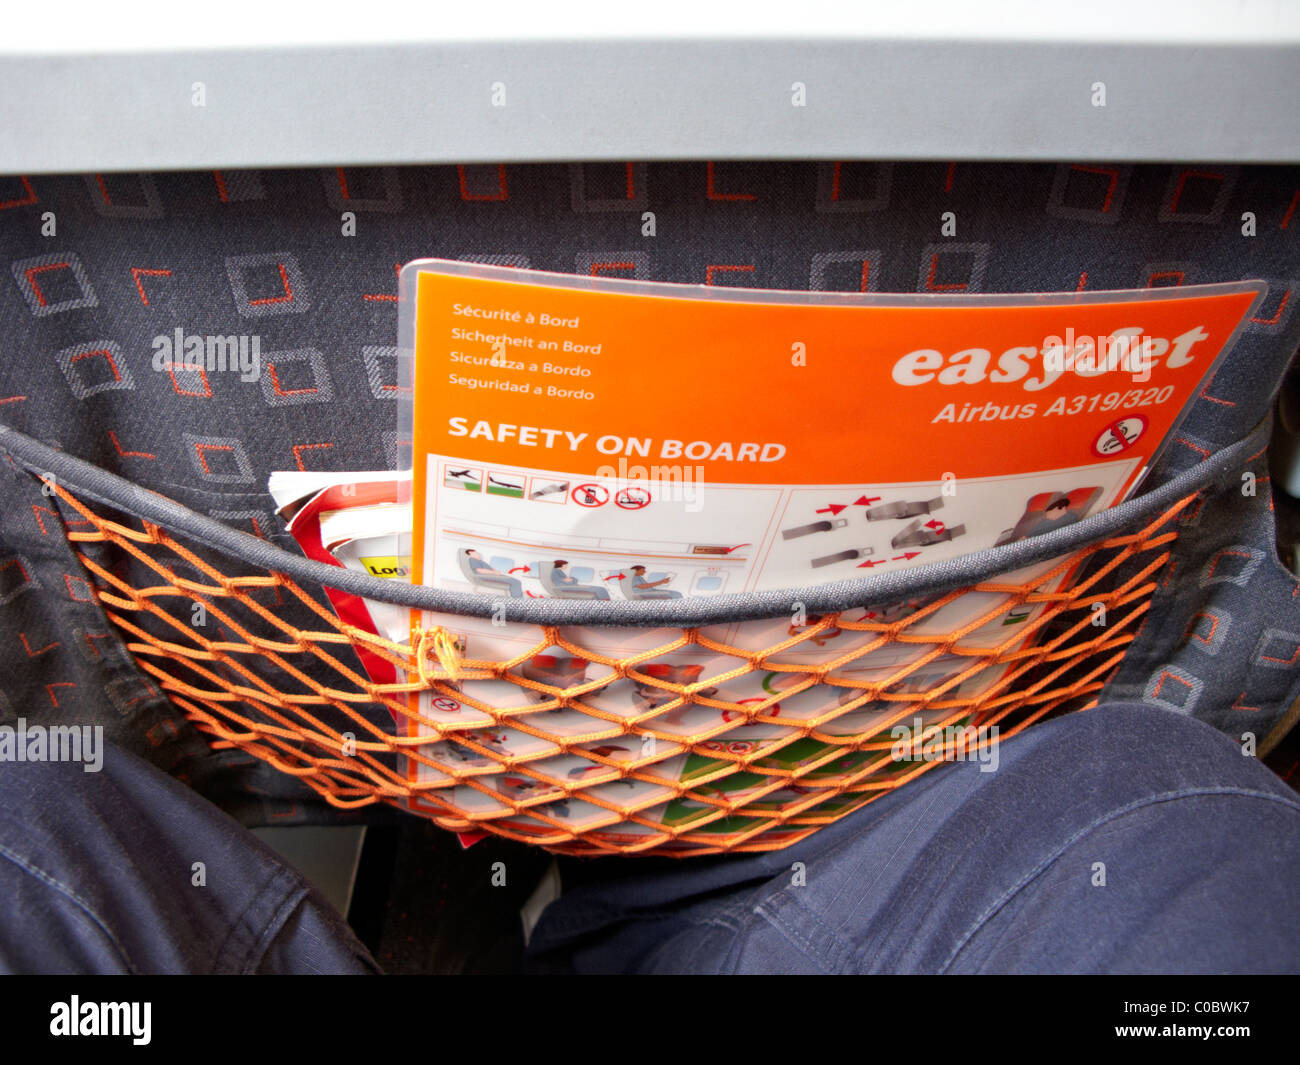 safety on board card in seat pocket of easyjet a319 airbus aircraft Stock Photo